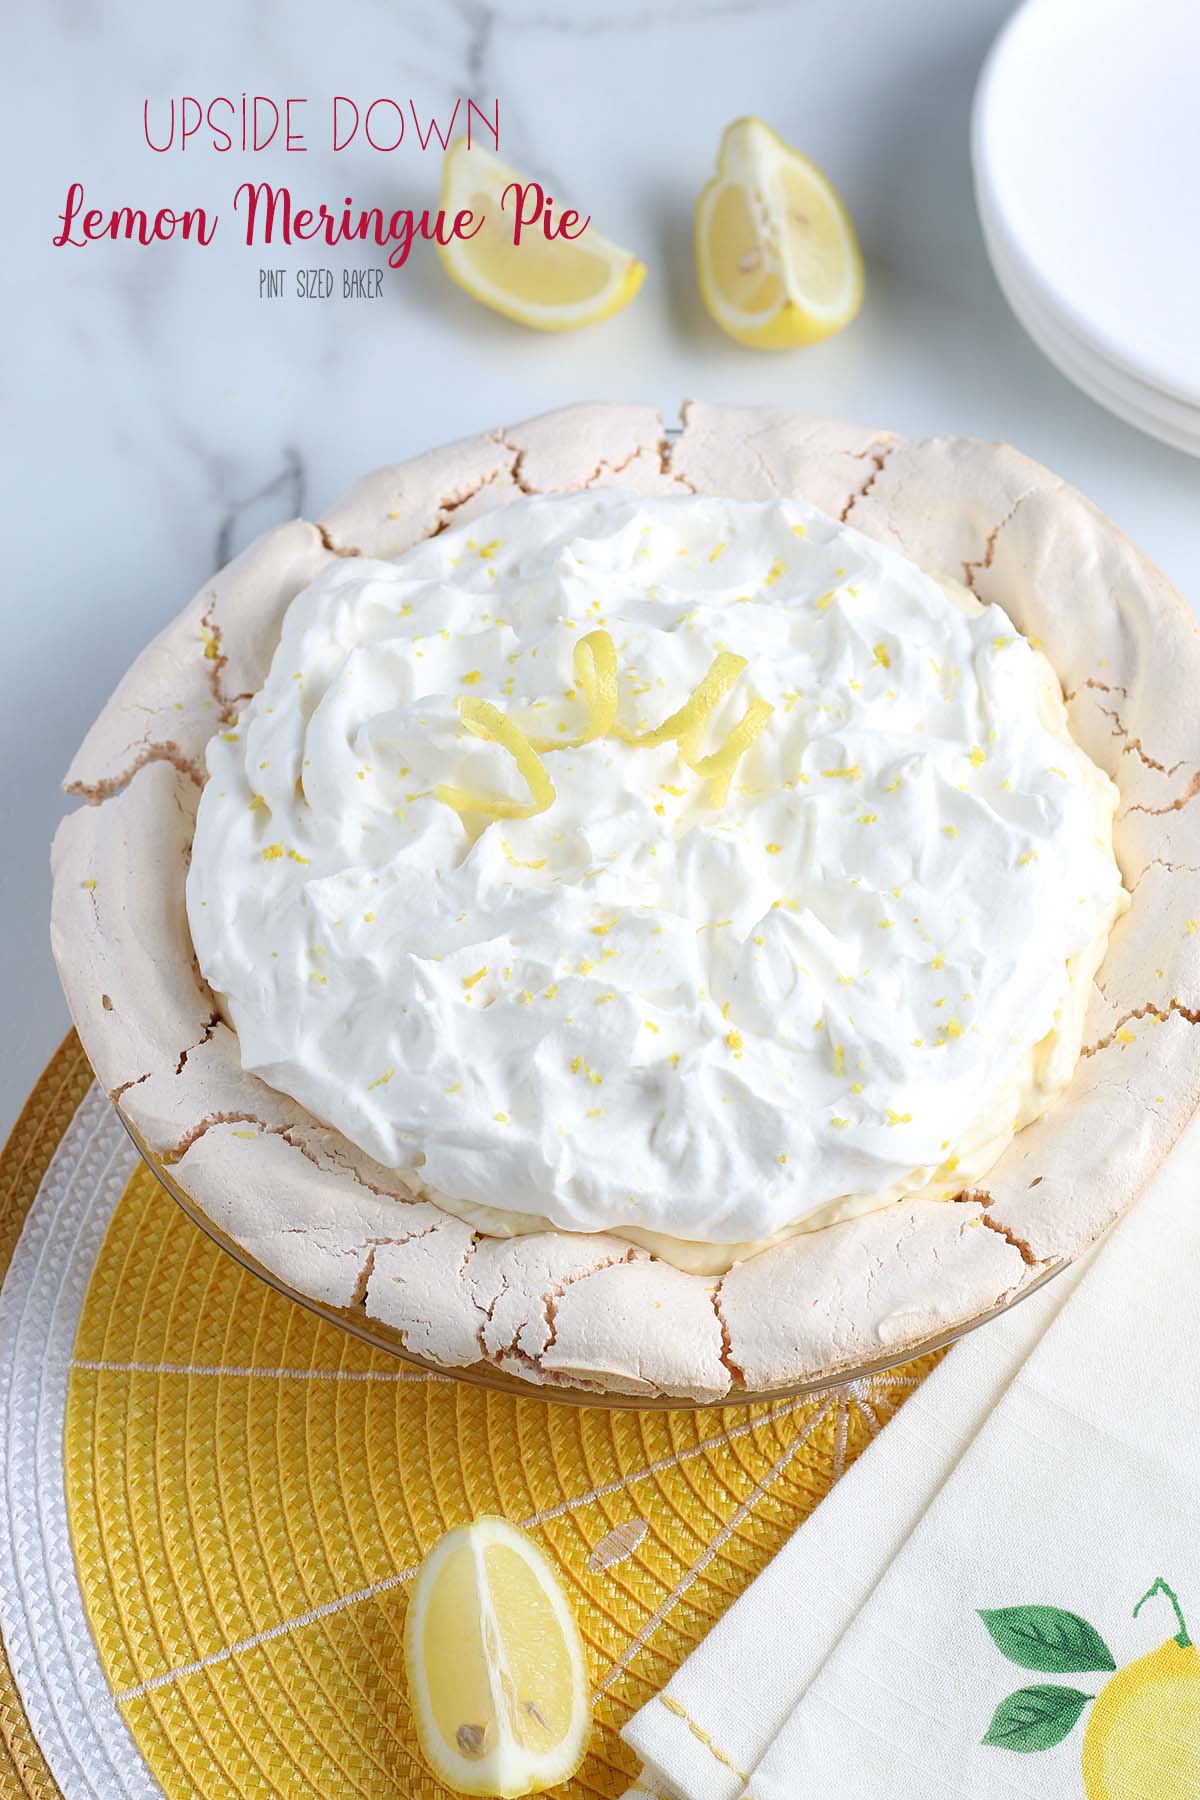 This upside down Lemon Cream Meringue Pie has the meringue on the bottom as the shell and then it's filled with sweet lemon curd and fresh whipped cream!